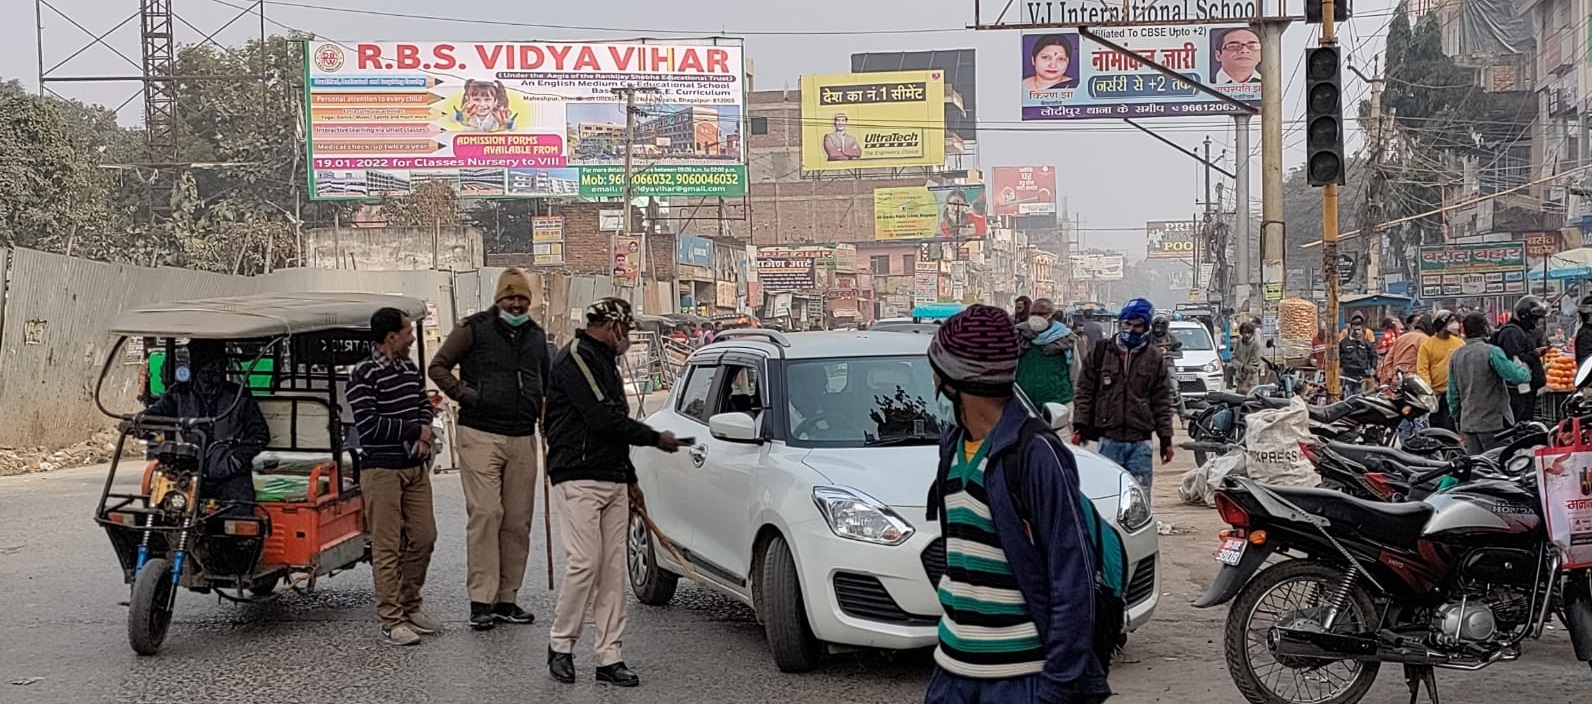 Traffic nightmare in Bhagalpur: People remain stuck in jams while cops busy collecting fines